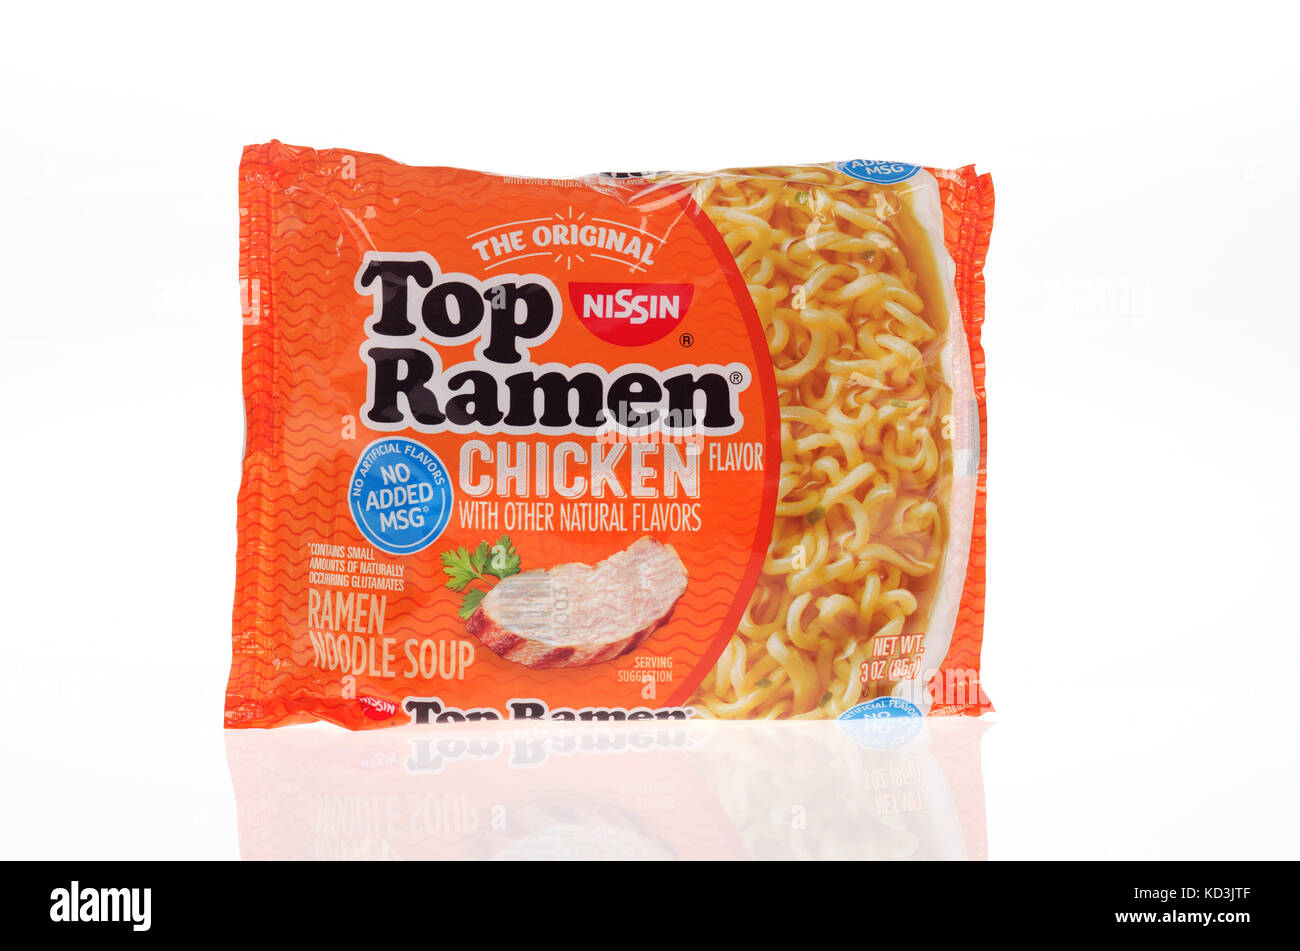 Unopened Original Nissin Top Ramen Noodle Soup in Chicken flavor with new packaging no artificial flavors or added msg & reduced sodium on white  USA Stock Photo